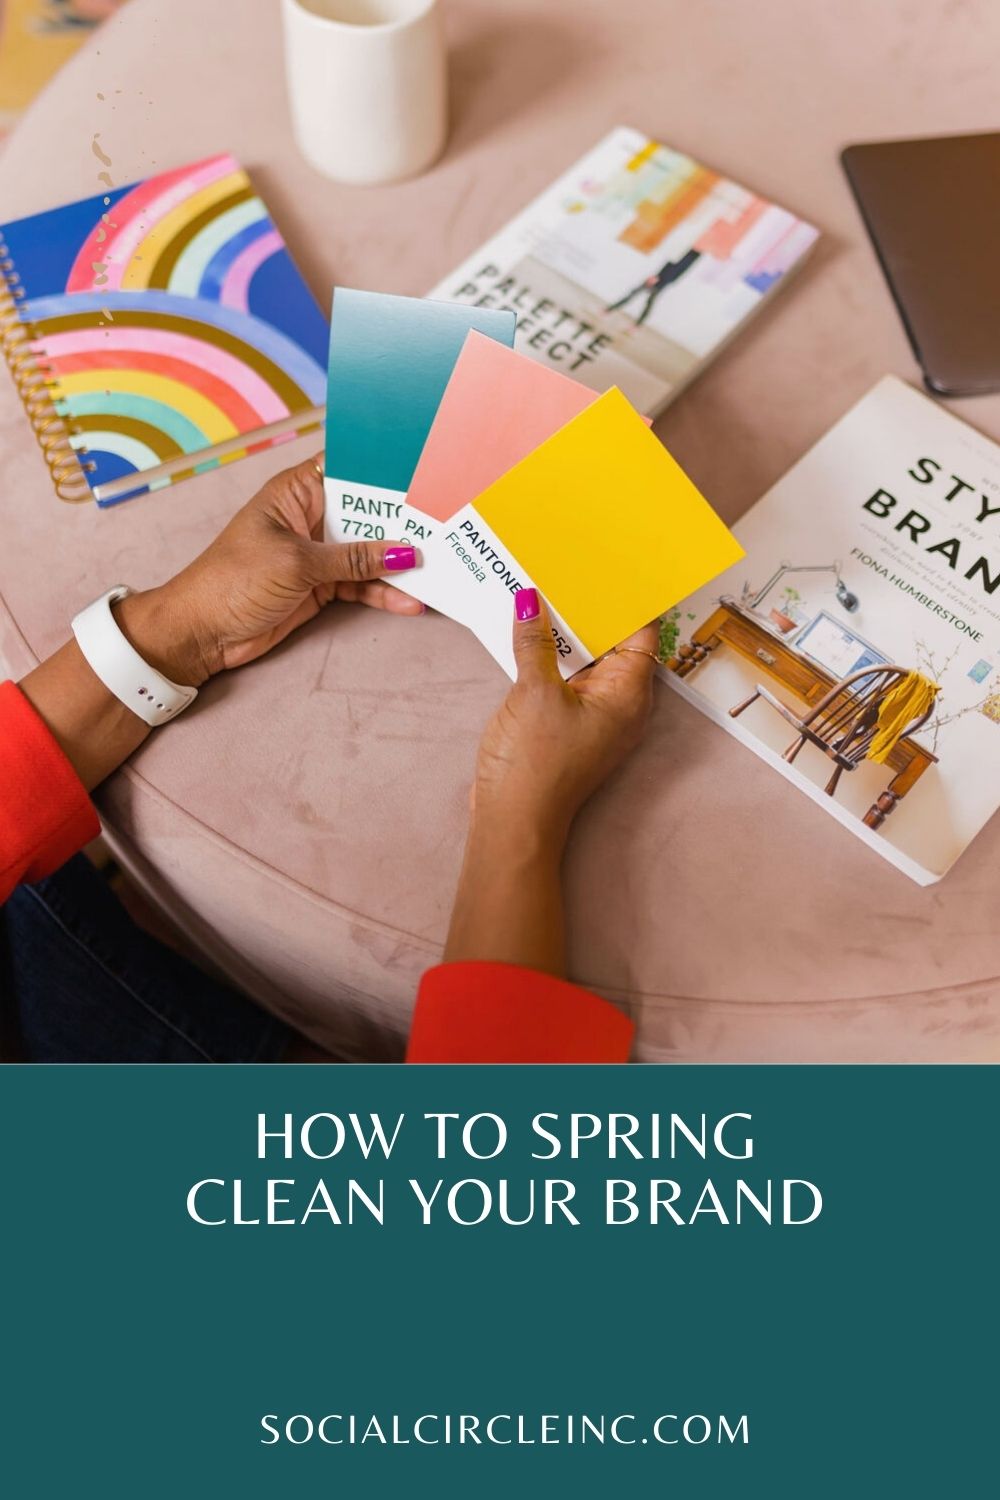 How to Spring Clean Your Brand